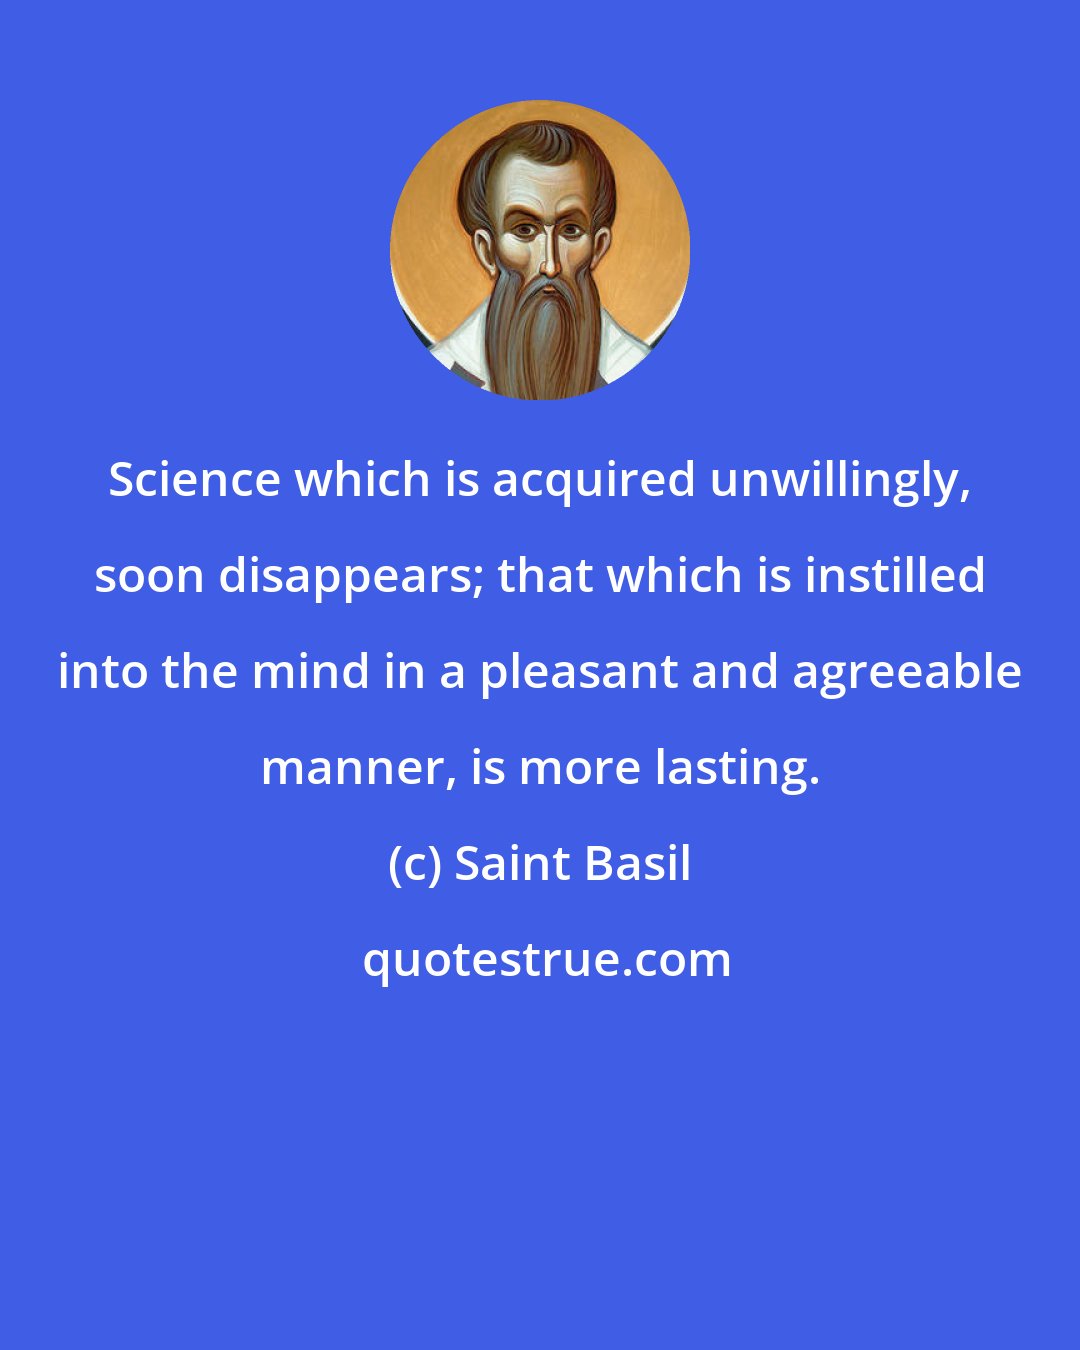 Saint Basil: Science which is acquired unwillingly, soon disappears; that which is instilled into the mind in a pleasant and agreeable manner, is more lasting.